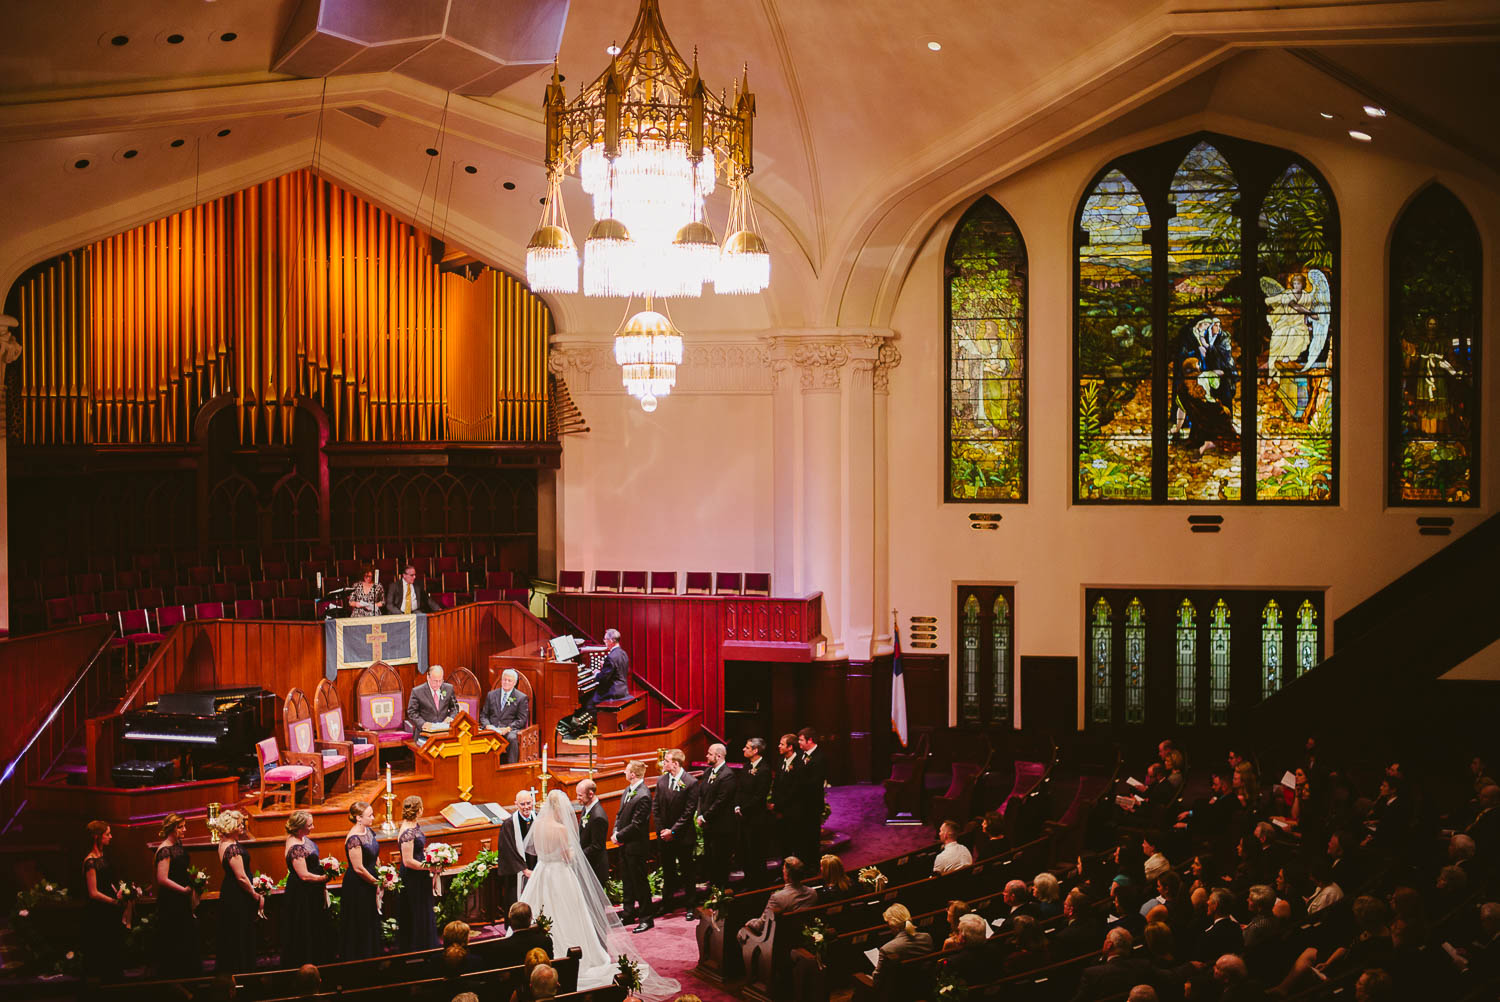 Wide angle photo of wedding ceremony at First United Methodist Church. Brides and groom stand together.